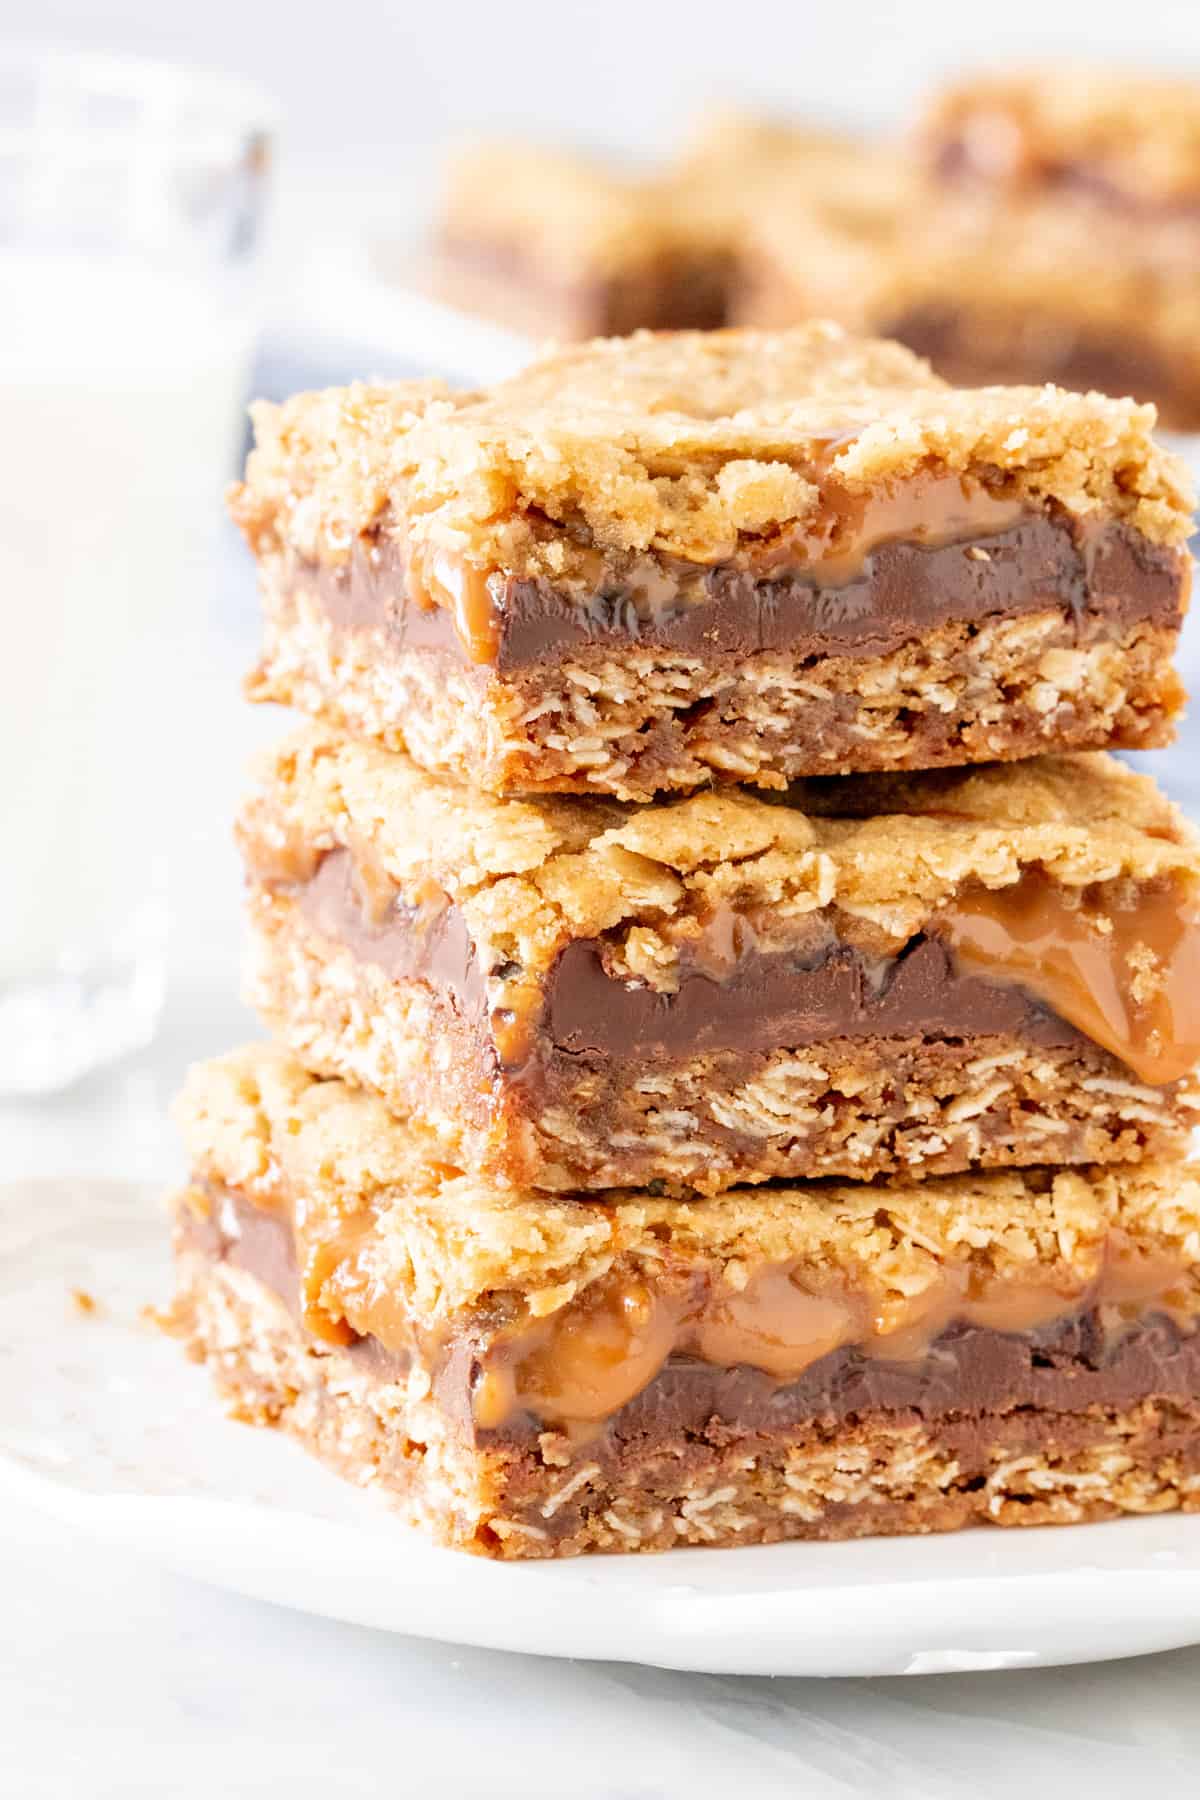 Stack of 2 caramel oatmeal bars with a glass of milk